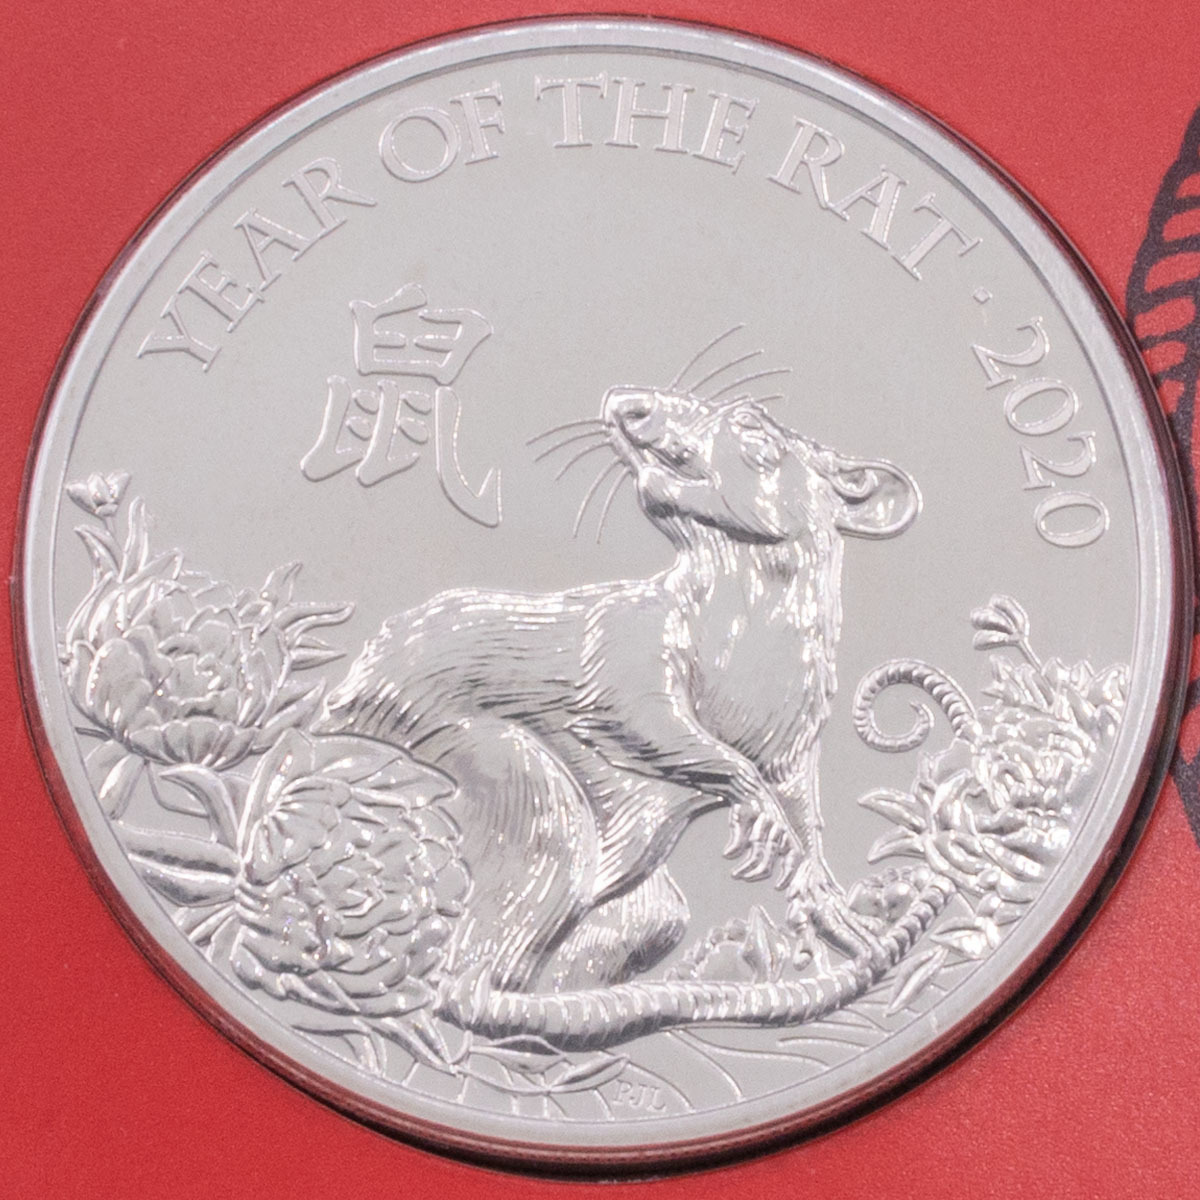 UKR20BU 2020 Lunar Year Of The Rat Five Pound Brilliant Uncirculated Coin In Folder Reverse